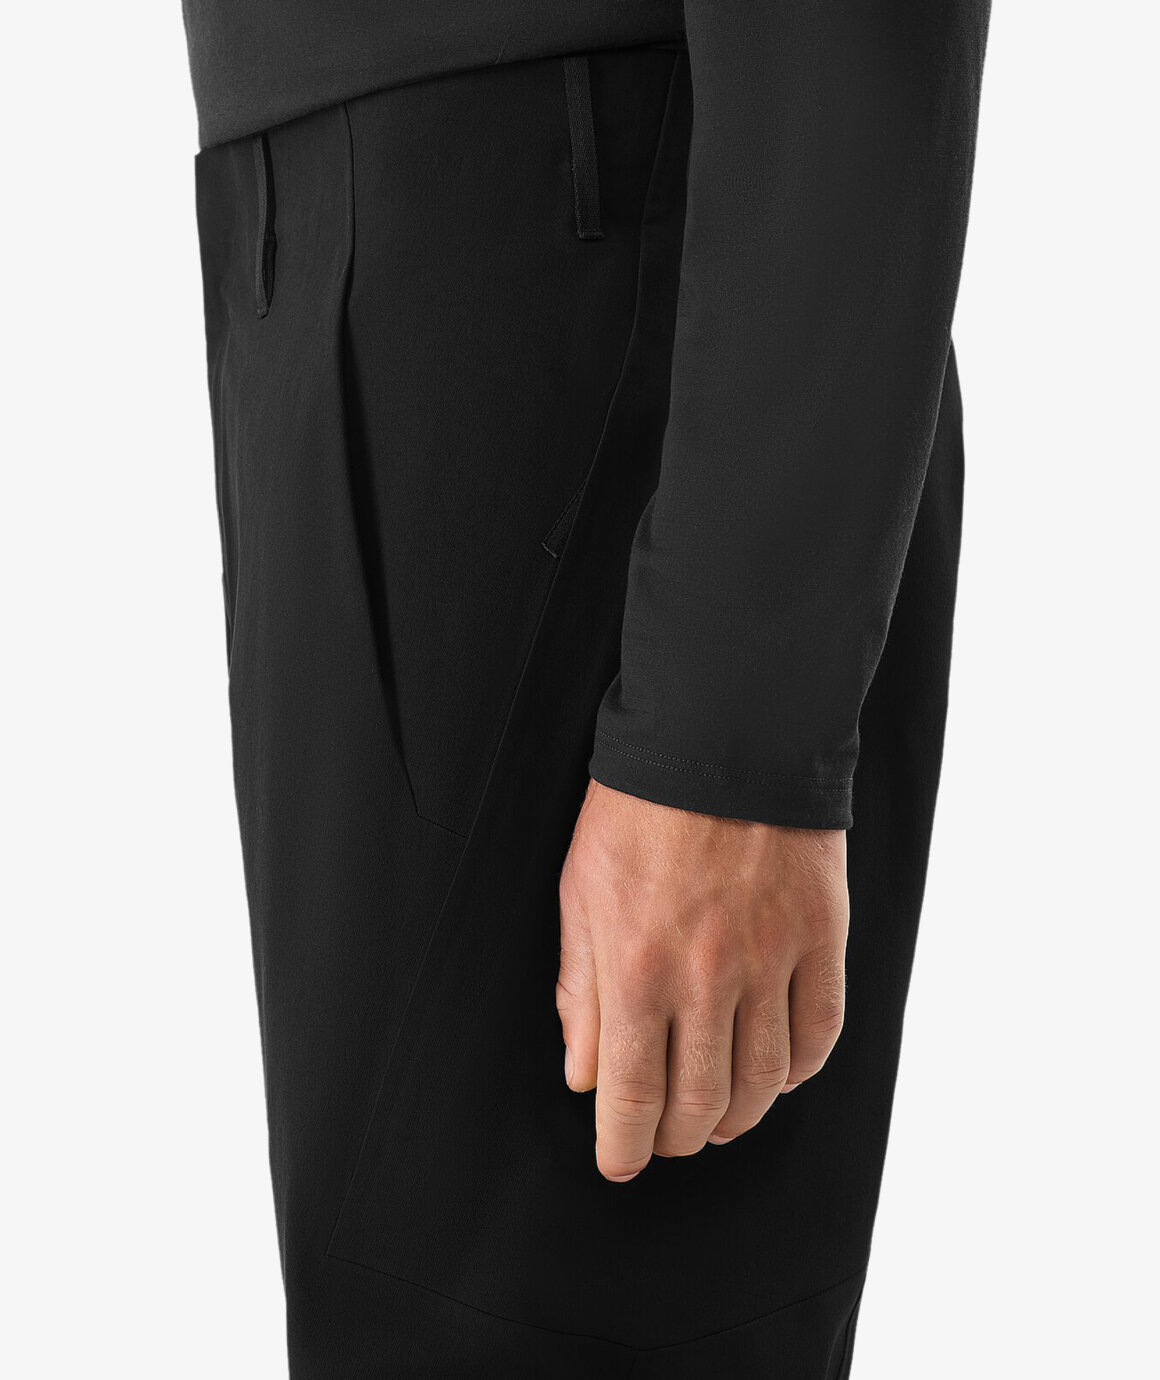 Norse Store | Shipping Worldwide - Veilance Align MX Pant M - Black